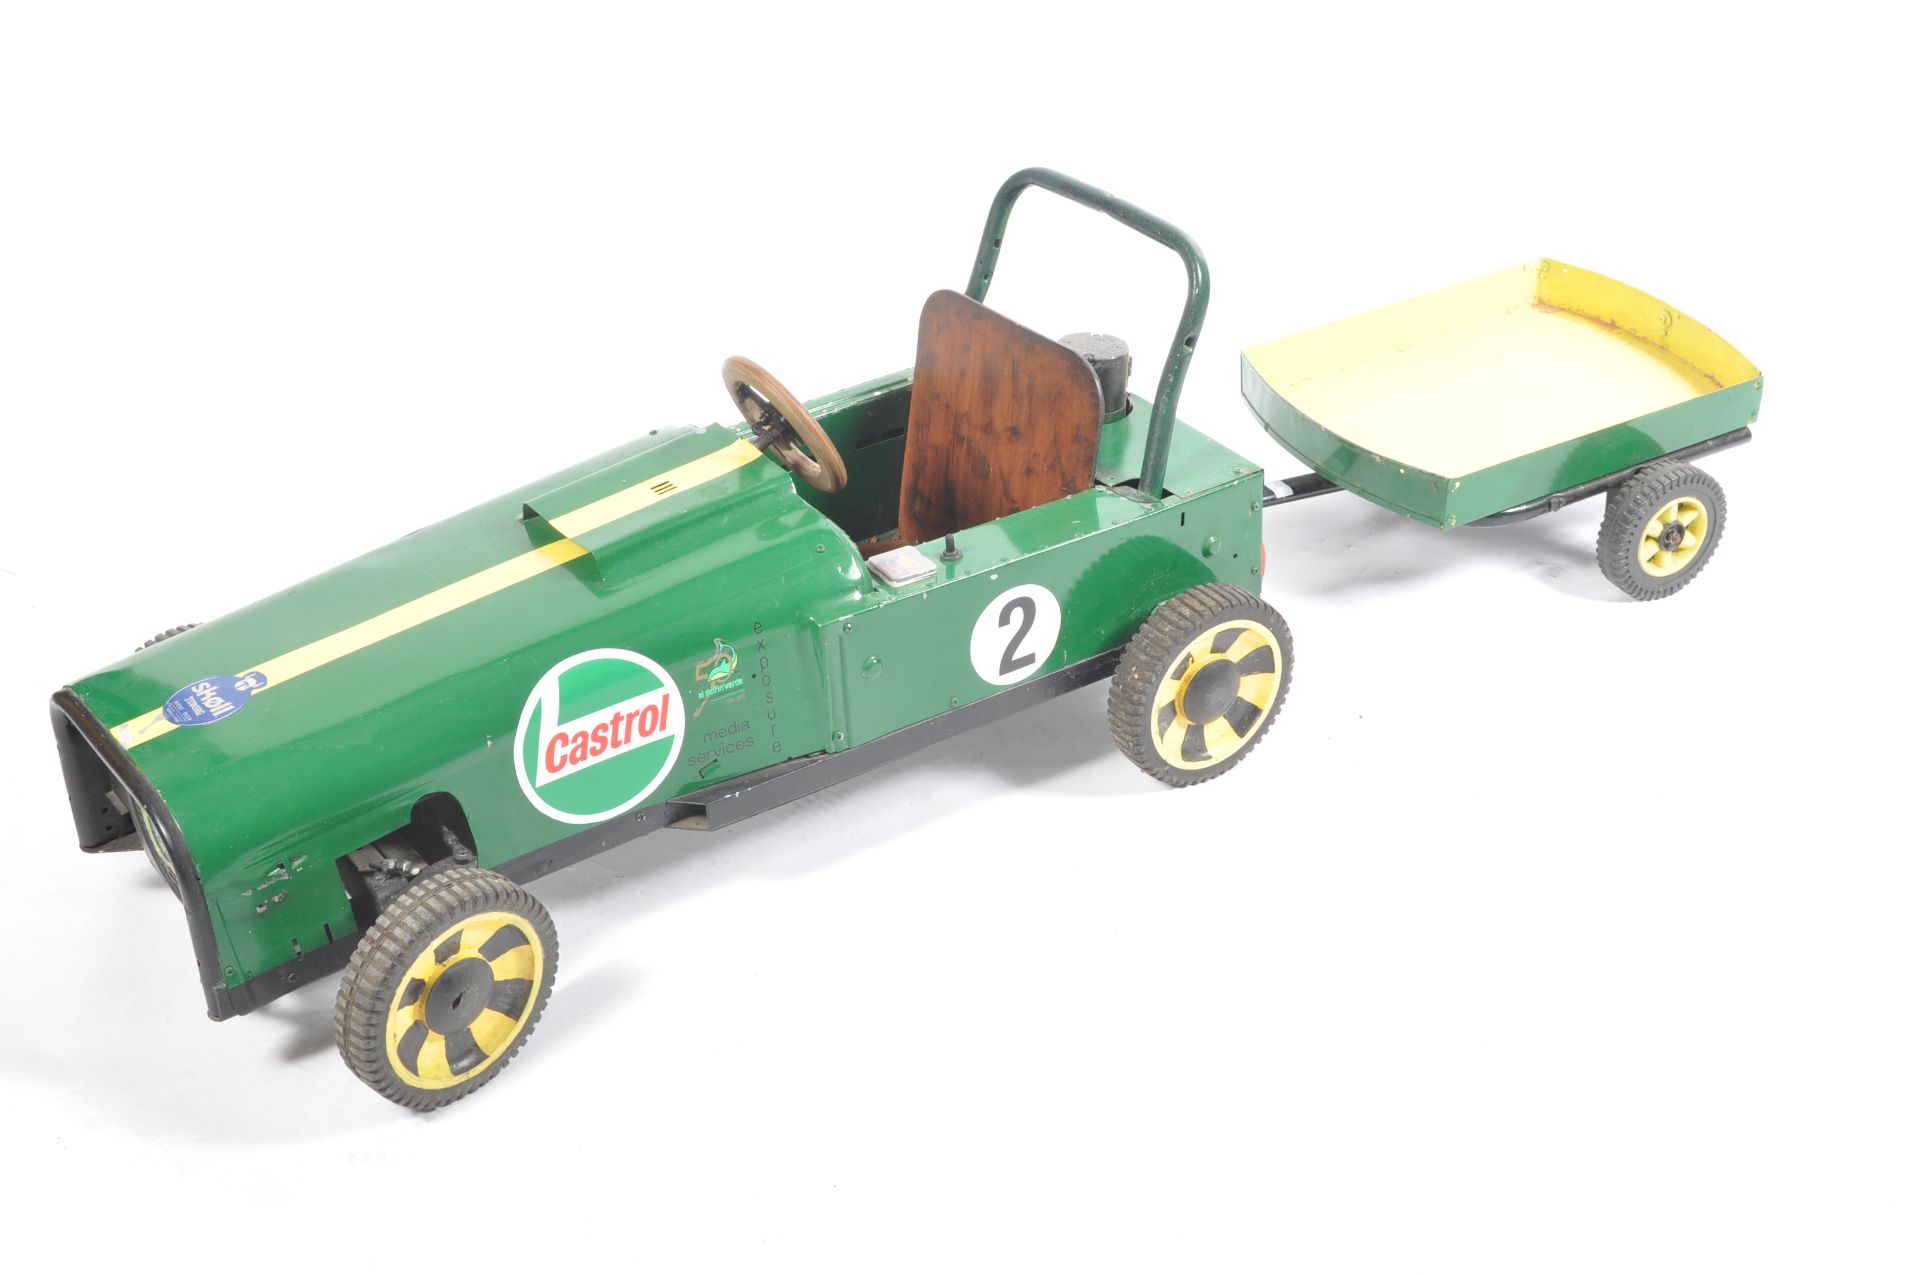 CASTROL GREEN CHILDS MOTOR POWERED GO KART AND TRAILER - Image 2 of 10